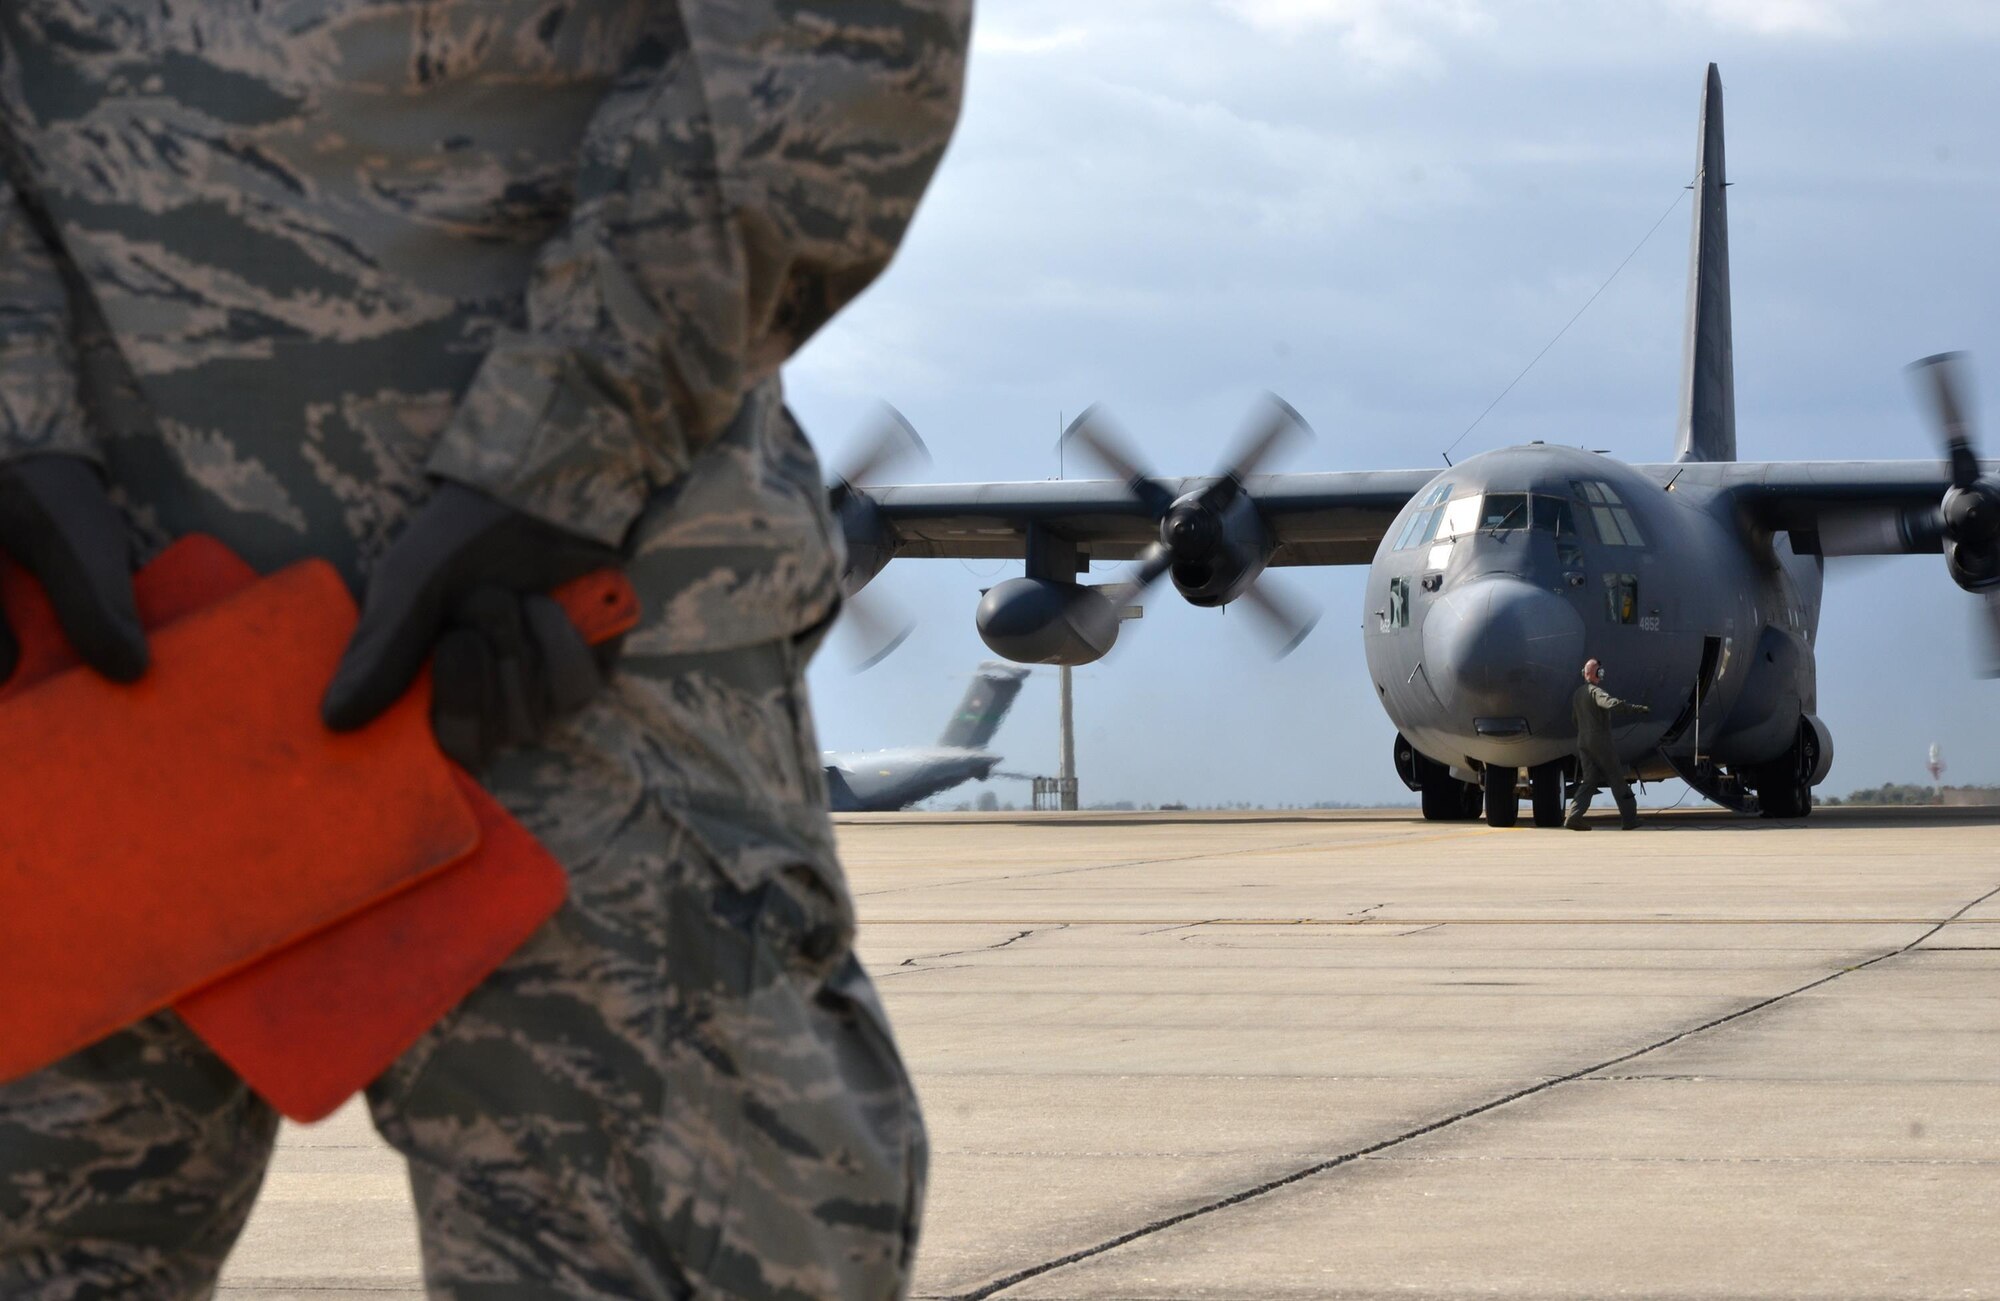 Senior Airman Liam Miner, 920th Aircraft Maintenance Squadron dedicated crew chief, stands by ready to marshall King 52, the first HC-130 configured for Air Force rescue, down the Patrick Air Force Base, Florida, taxiway for the last time March 6, 2017. King 52 will retire at Davis-Monthan Air Force Base, Arizona, with more than 50 years of service. (U.S. Air Force photo/Tech. Sgt. Lindsey Maurice)